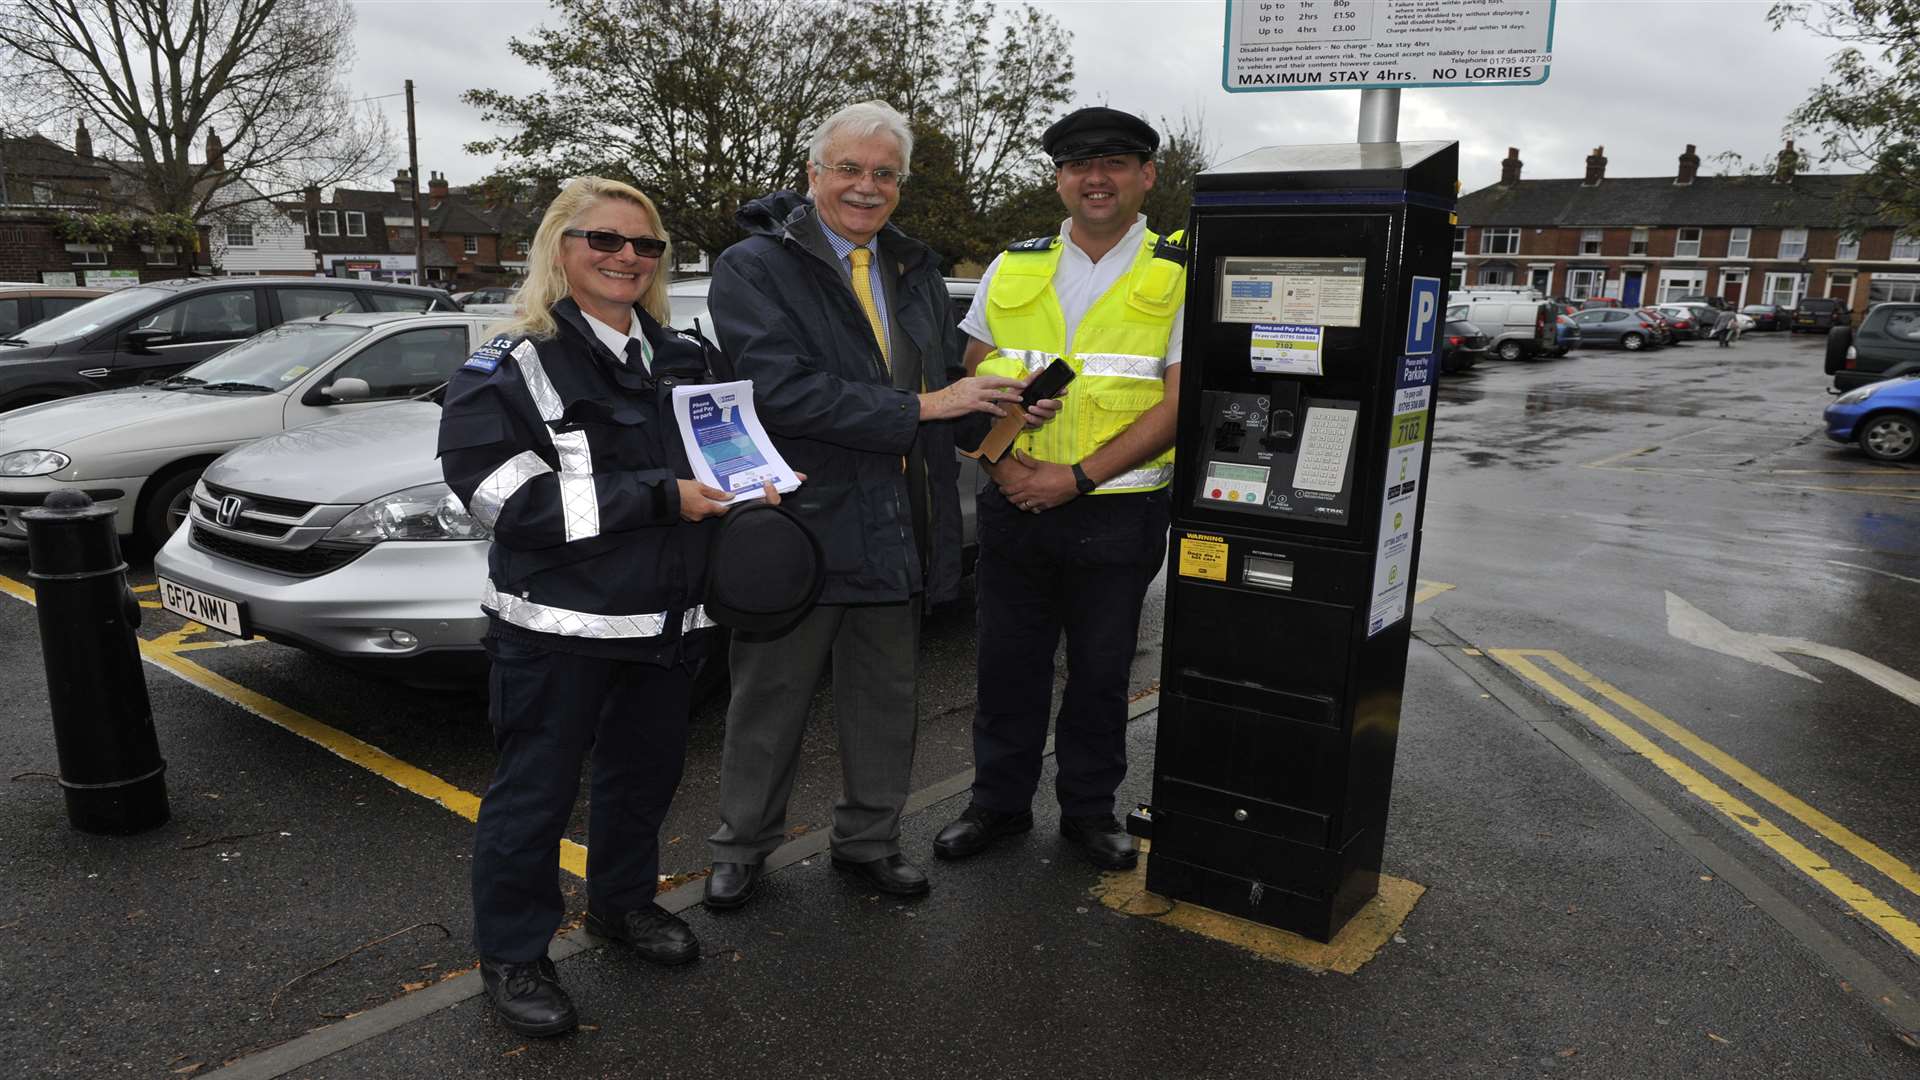 Cllr. Mike Cosgrove with wardens in Faversham Central car park